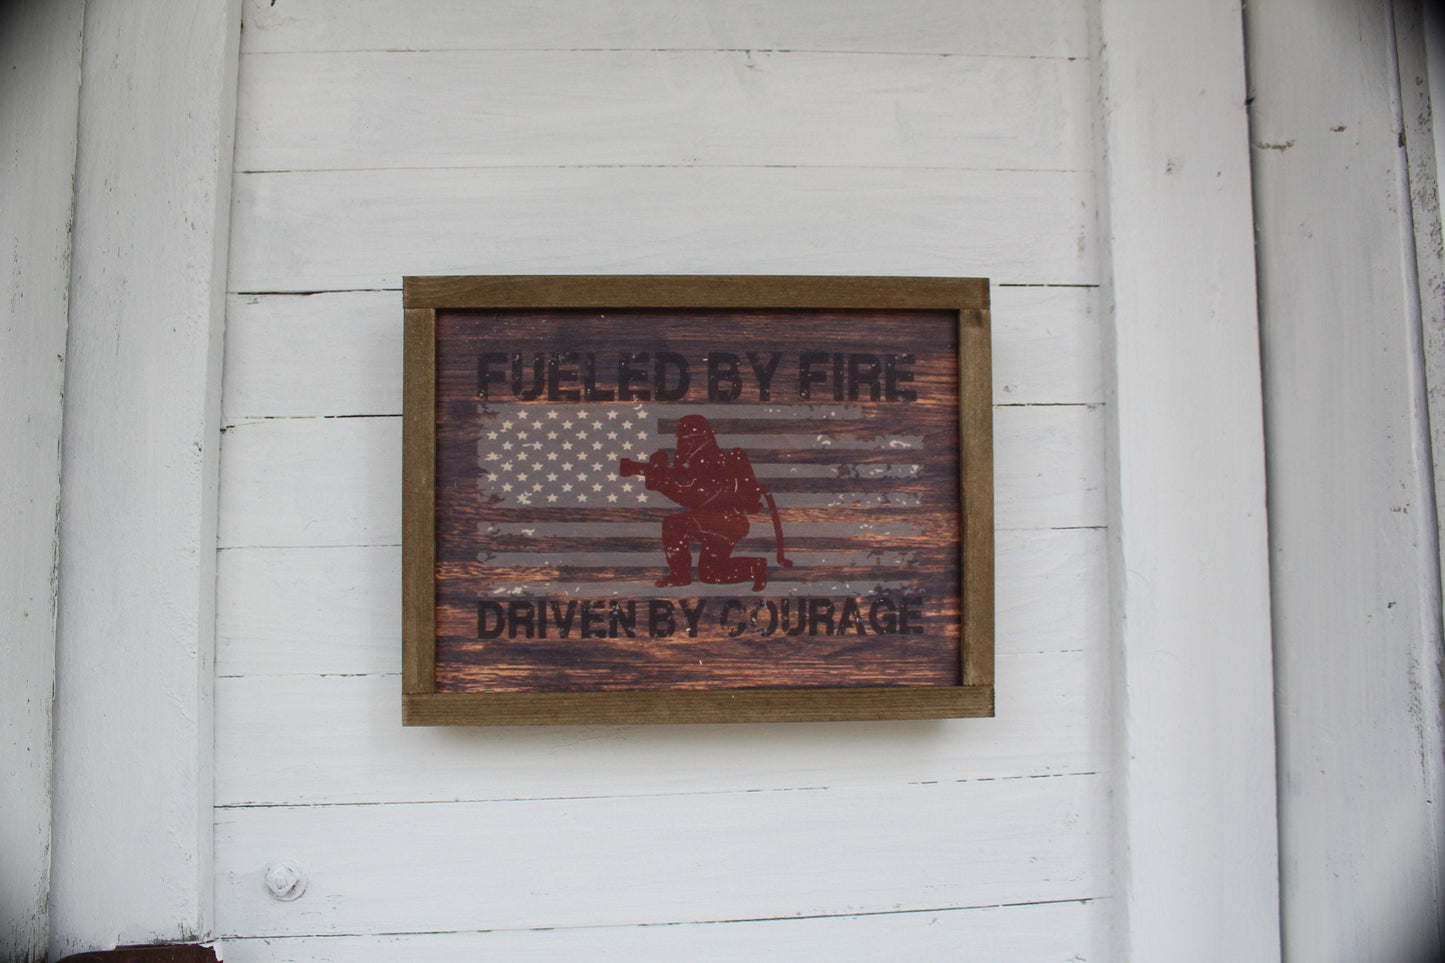 Fueled By Fire Driven By Courage Fire Fighter Fireman American Flag Rustic Wood Sign Framed Print Decor Farmhouse Primitive Wall Décor